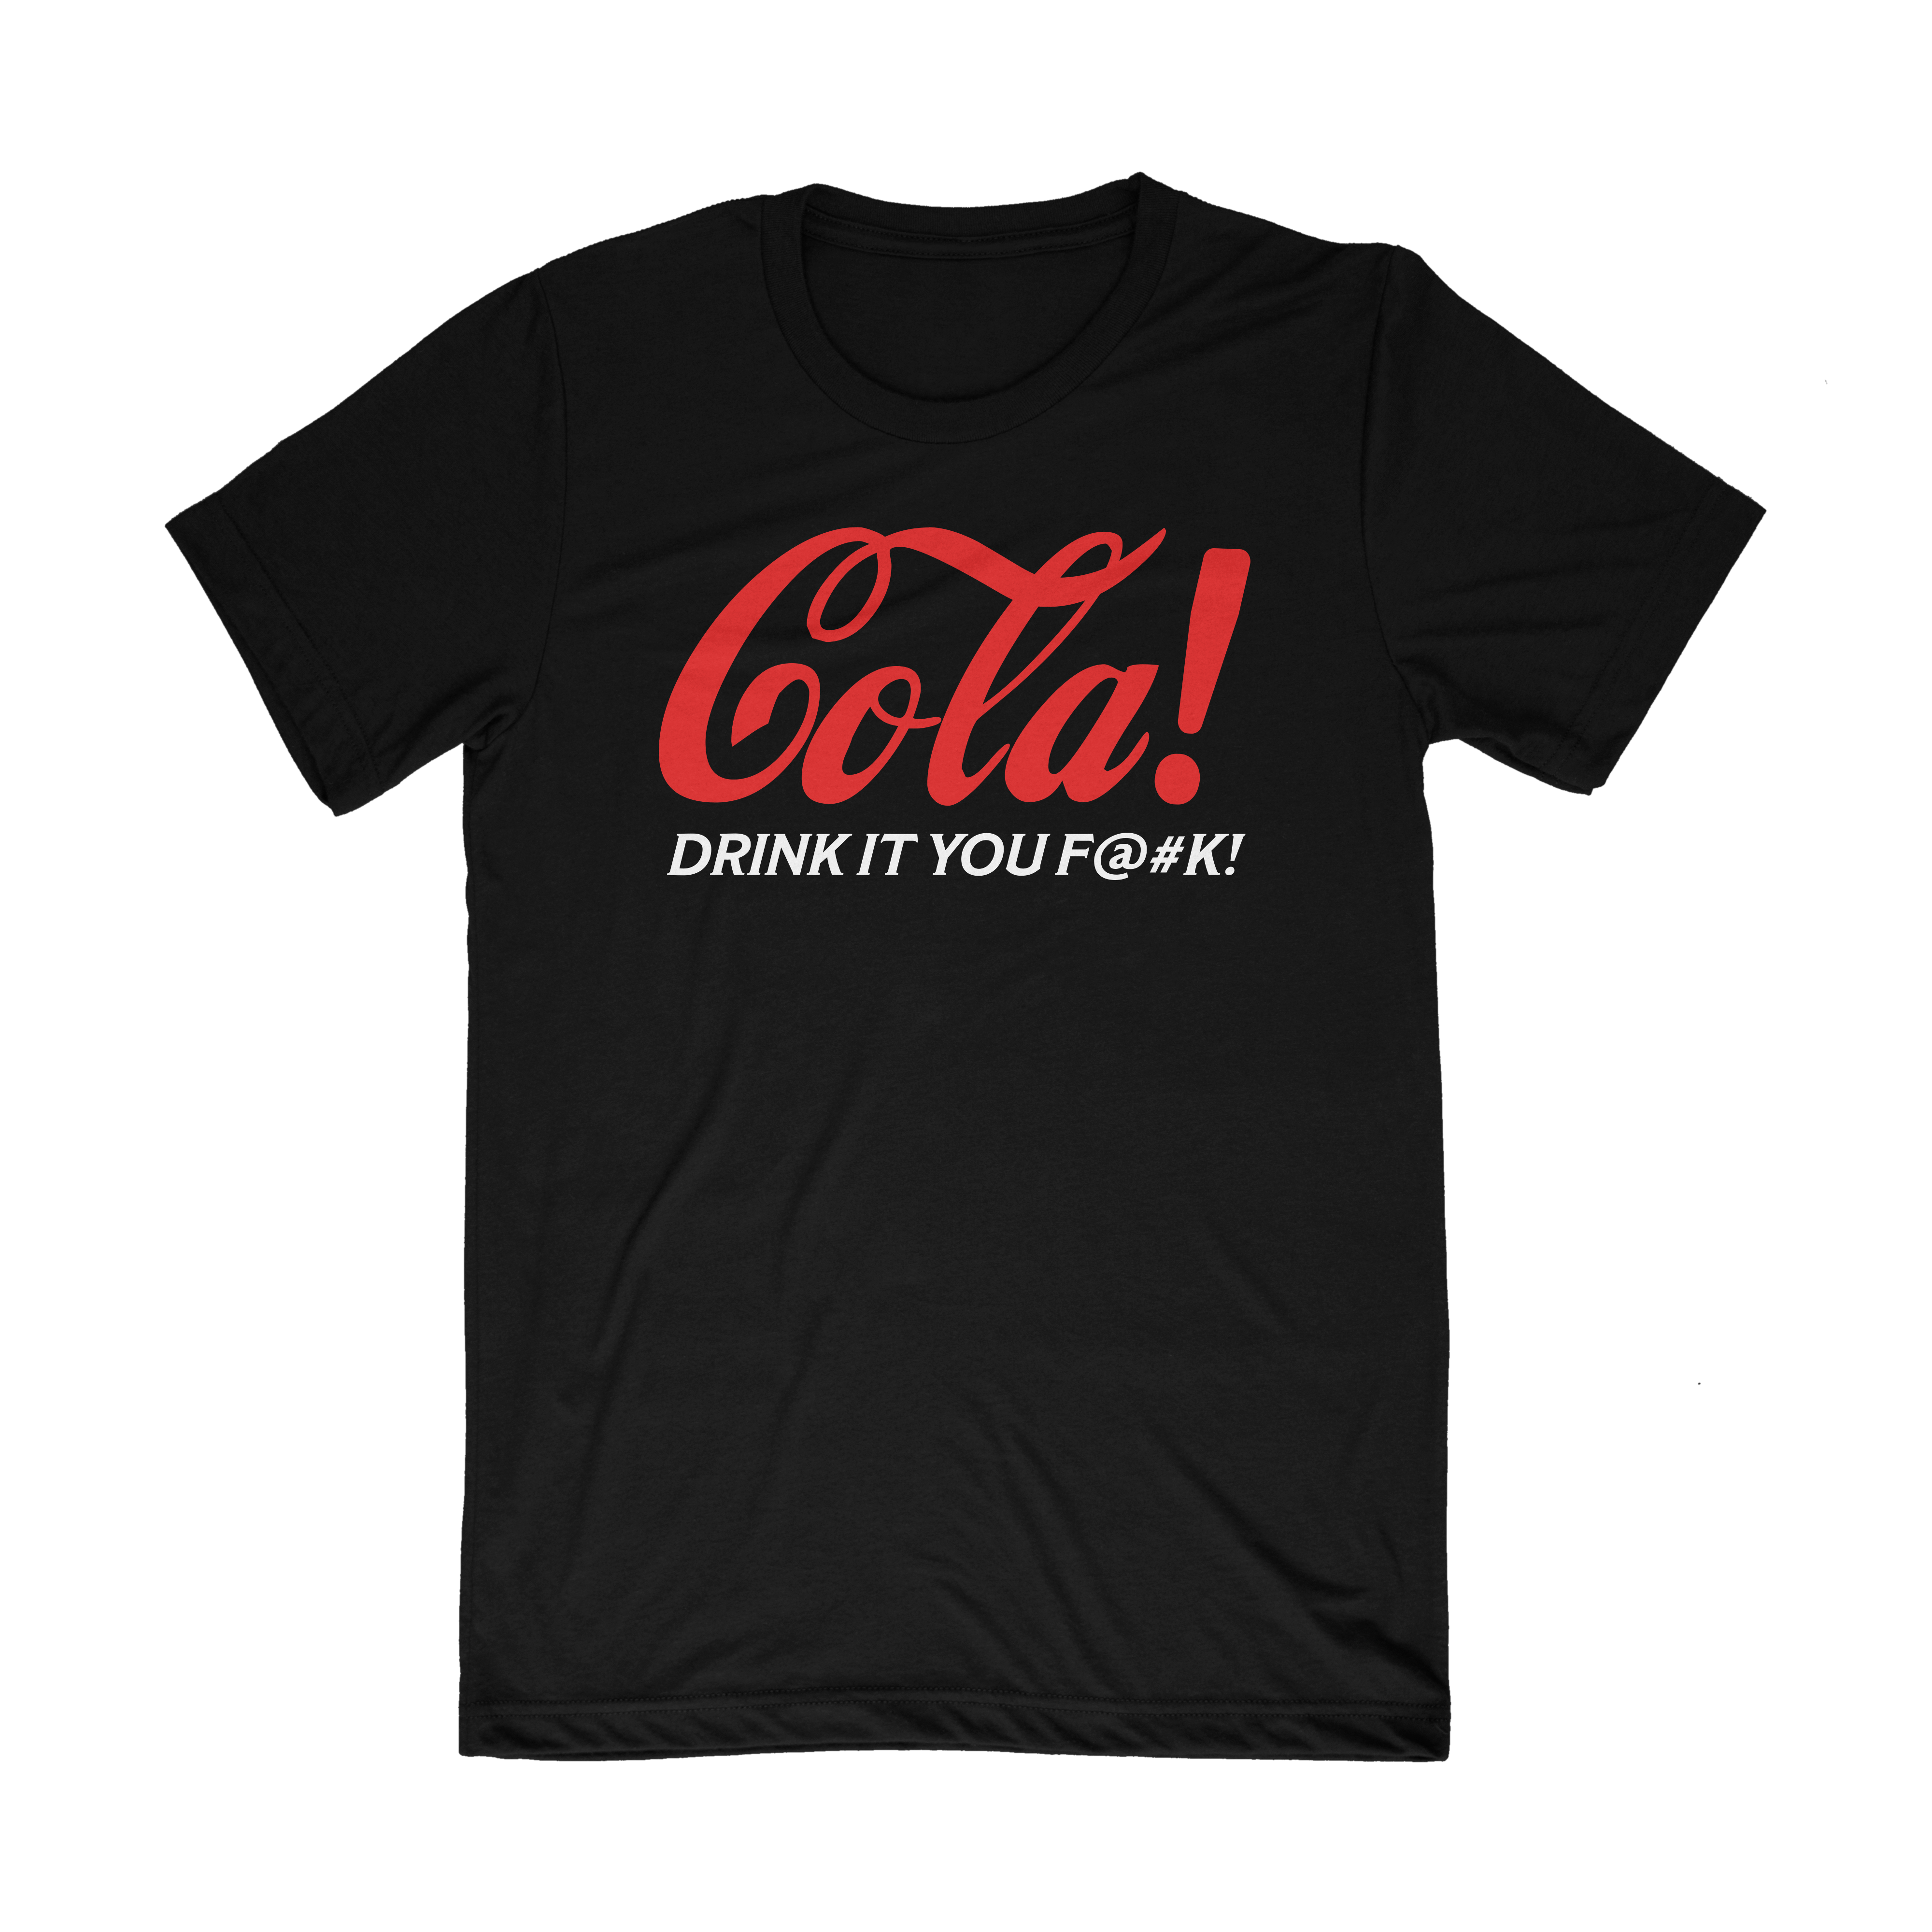 Cody Chaos - Cola - Drink It (Censored) Shirt